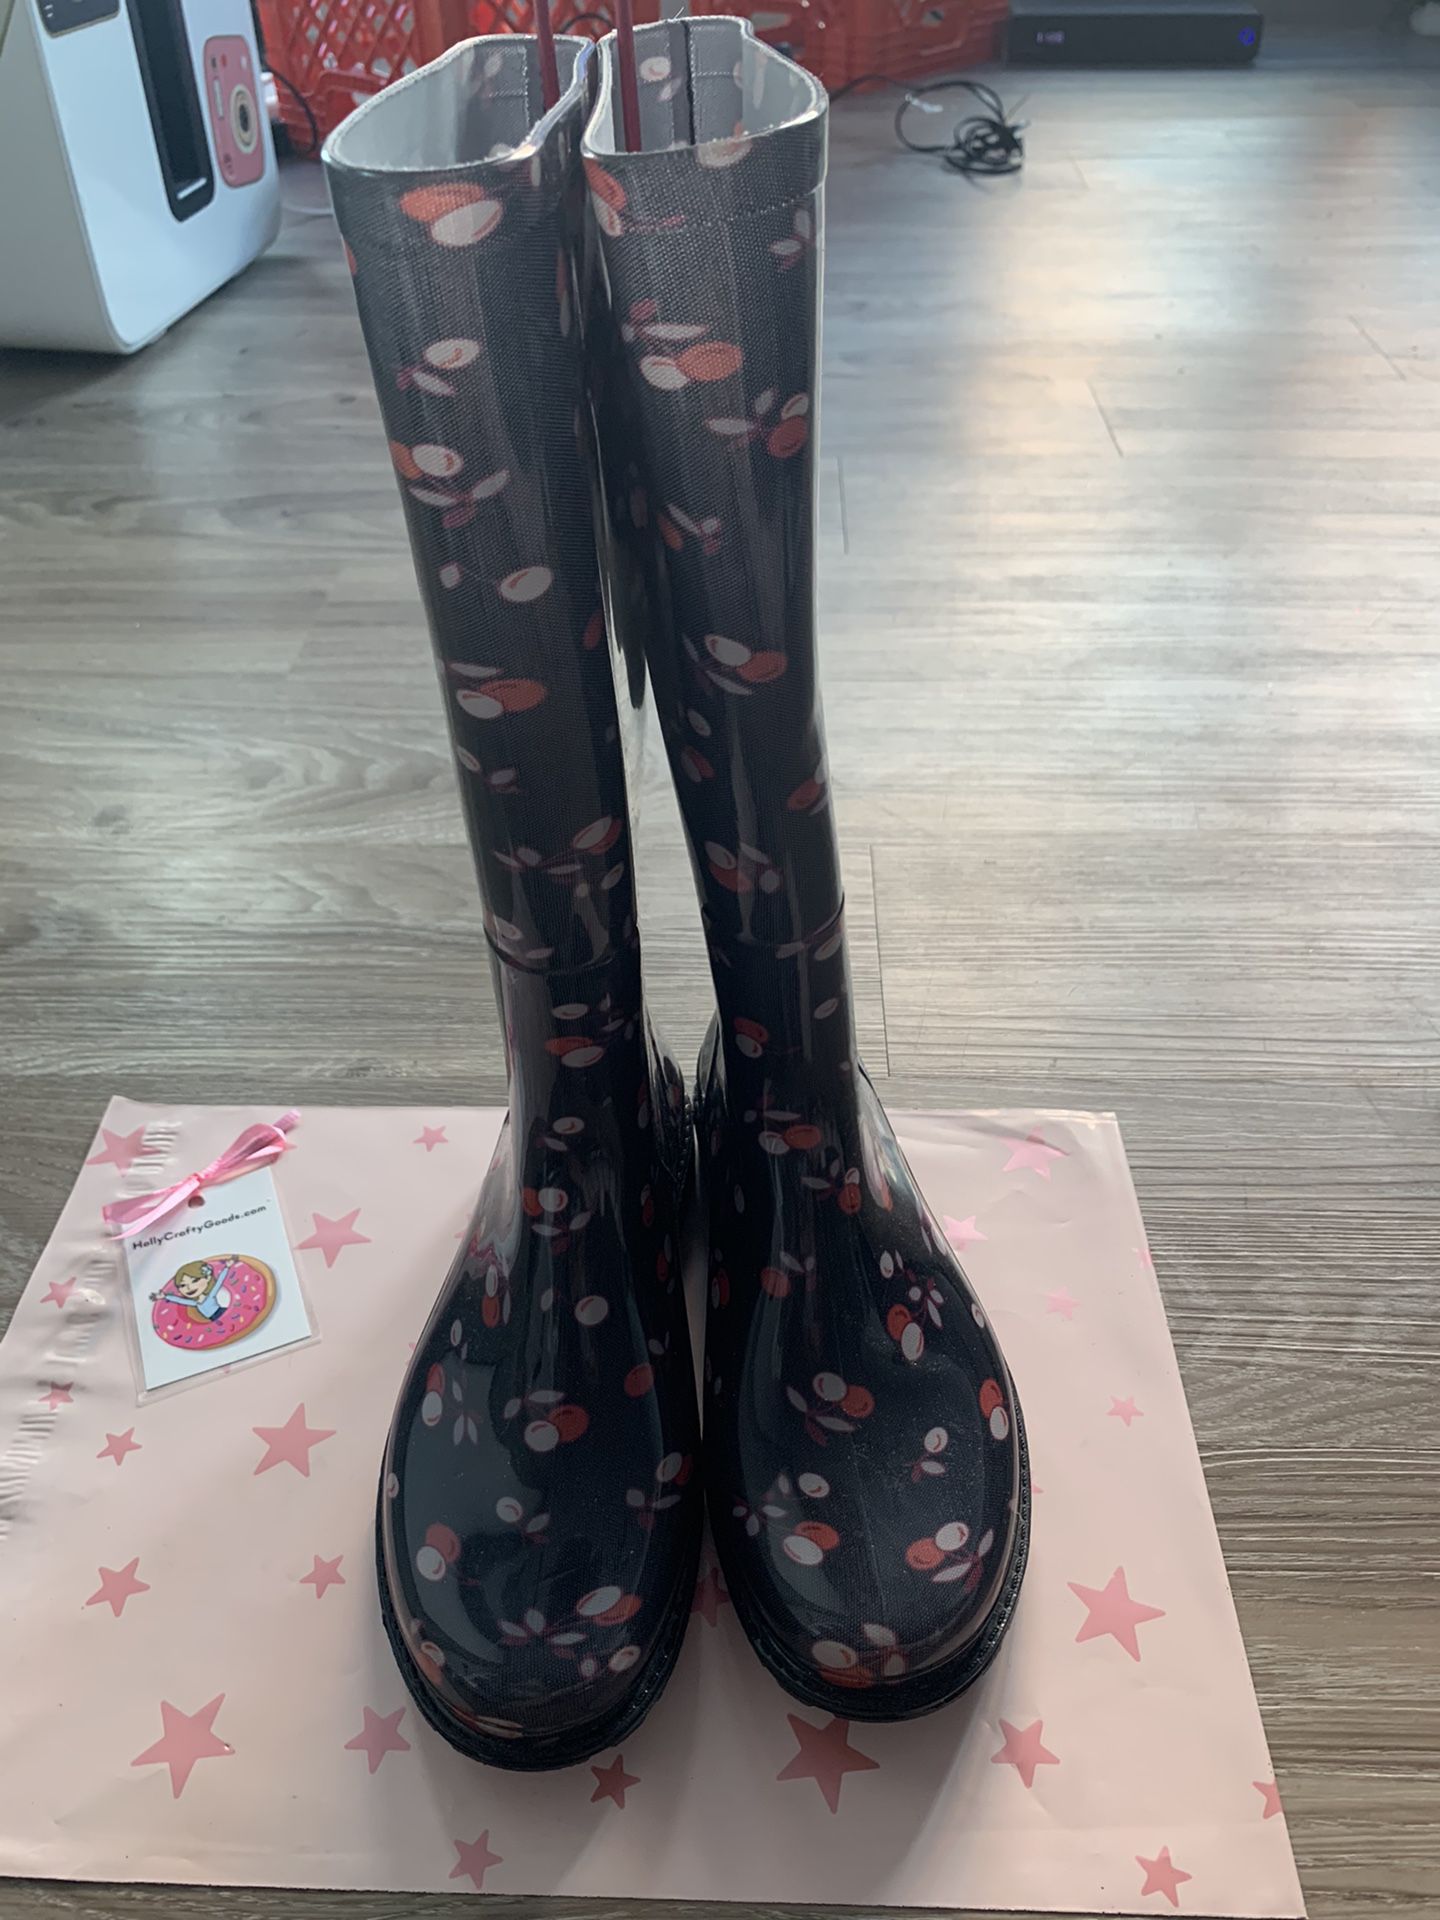 Red Valentino Rain Boots worn once size 36 adorable